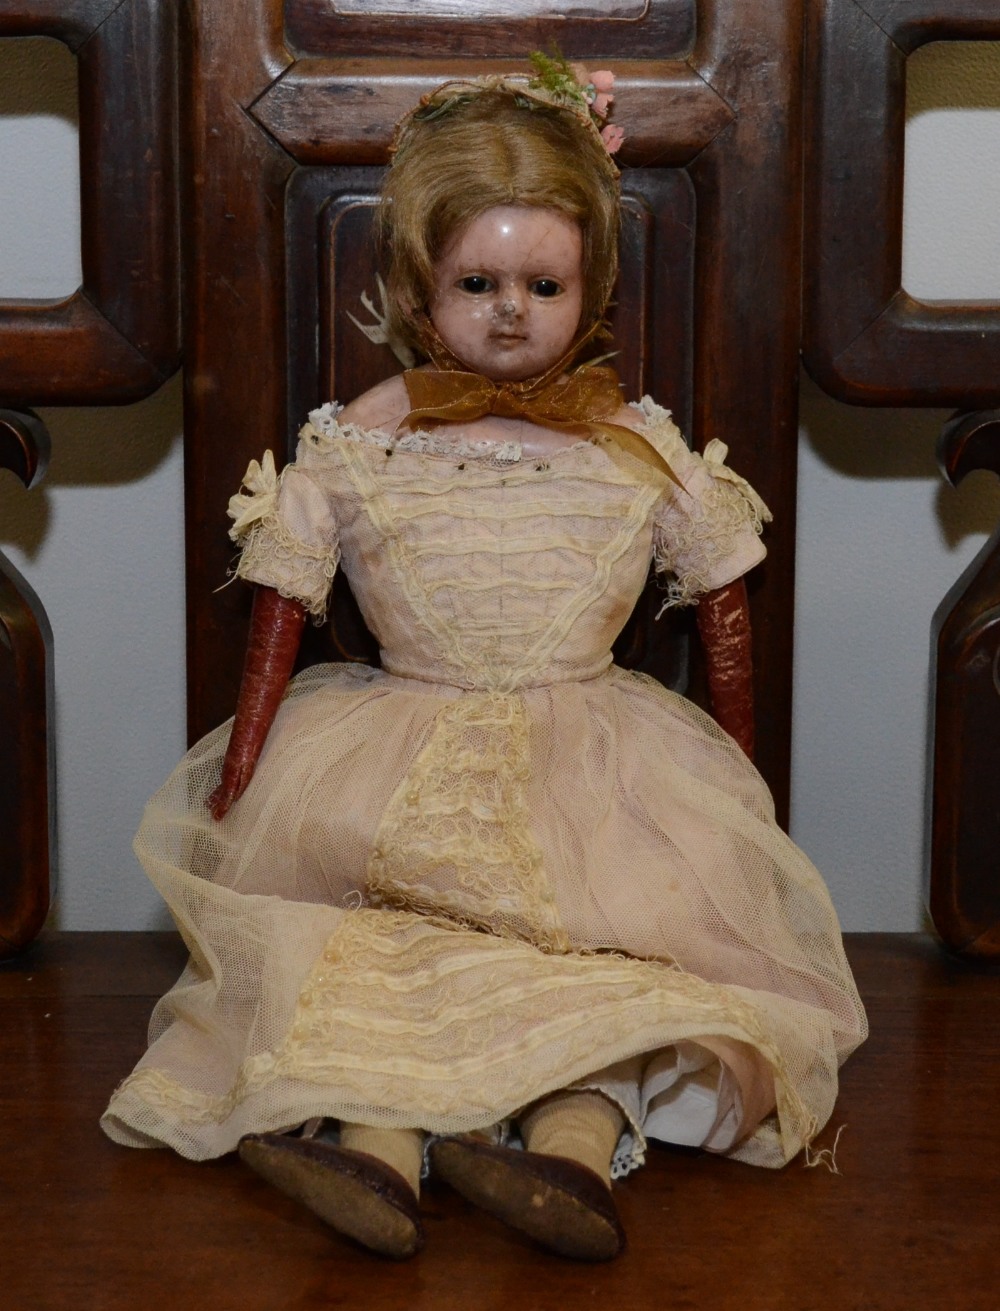 A late 19th century wax over composition head and shoulder doll, inset black glass eyes, partly